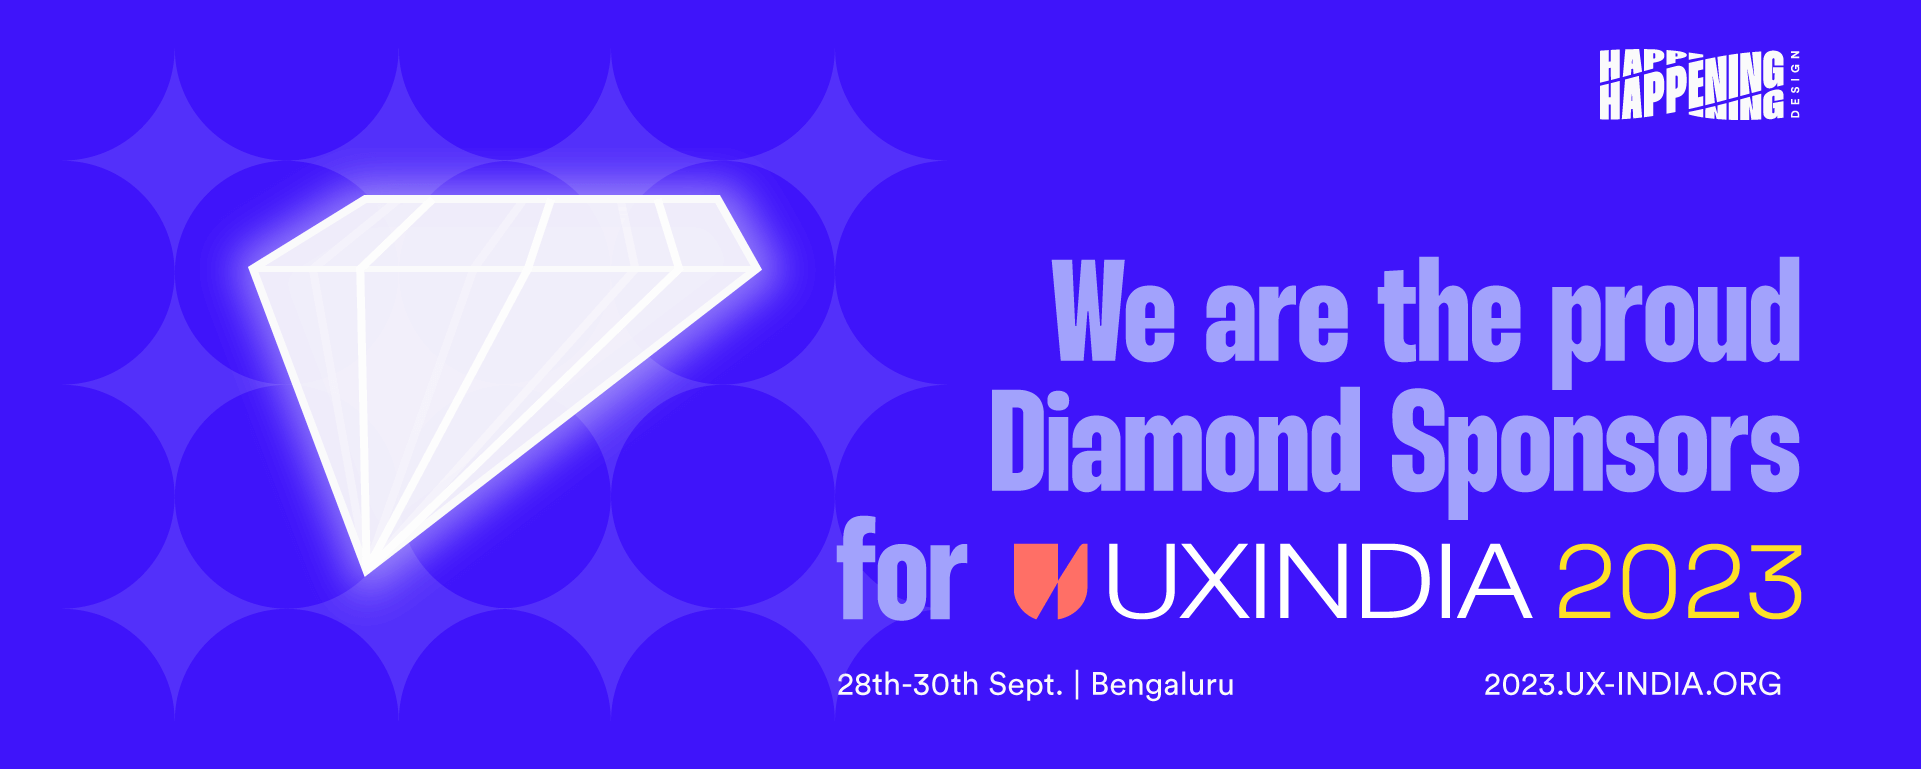 Happening Design is Proud to be a Sponsor of UX India 2023